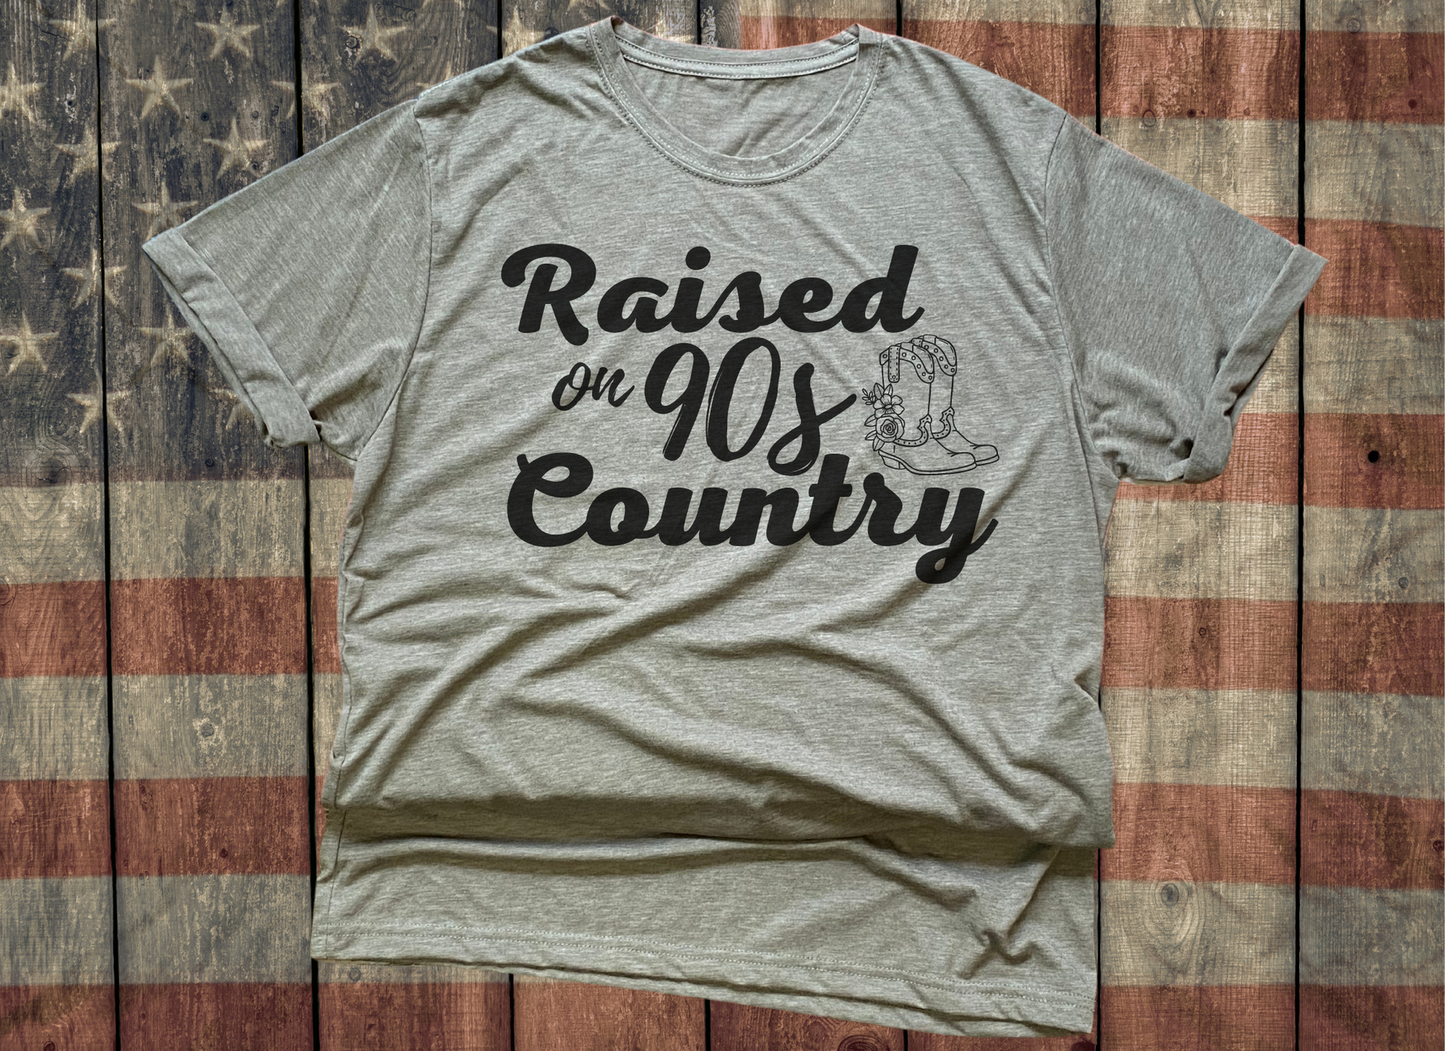 IMPERFECT SALE - Raised on 90s Country Shirt